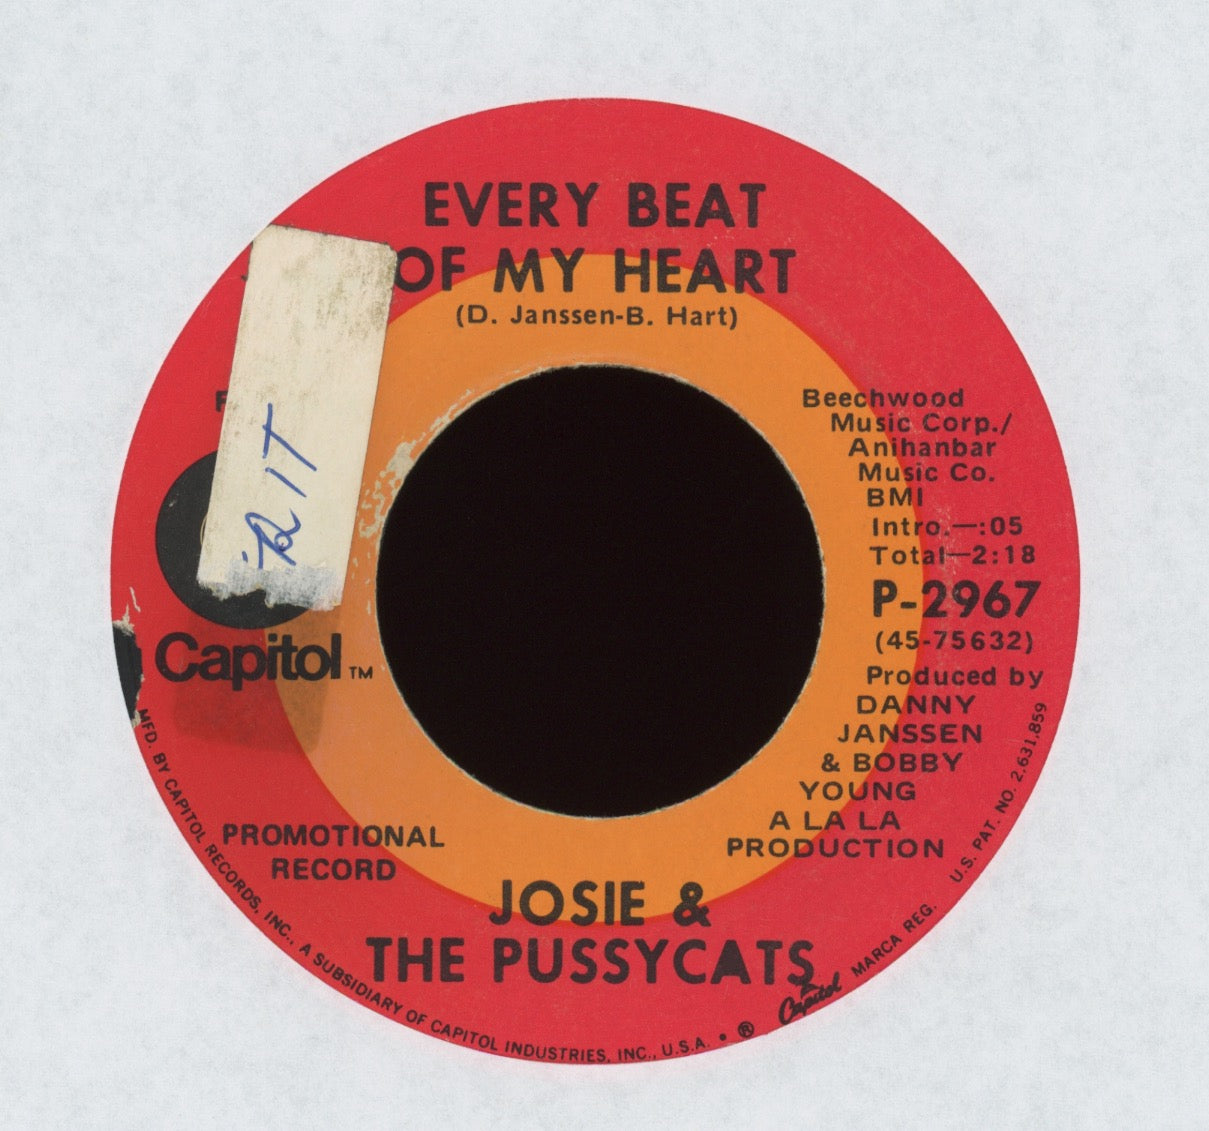 Josie And The Pussycats - Every Beat Of My Heart on Capitol Promo